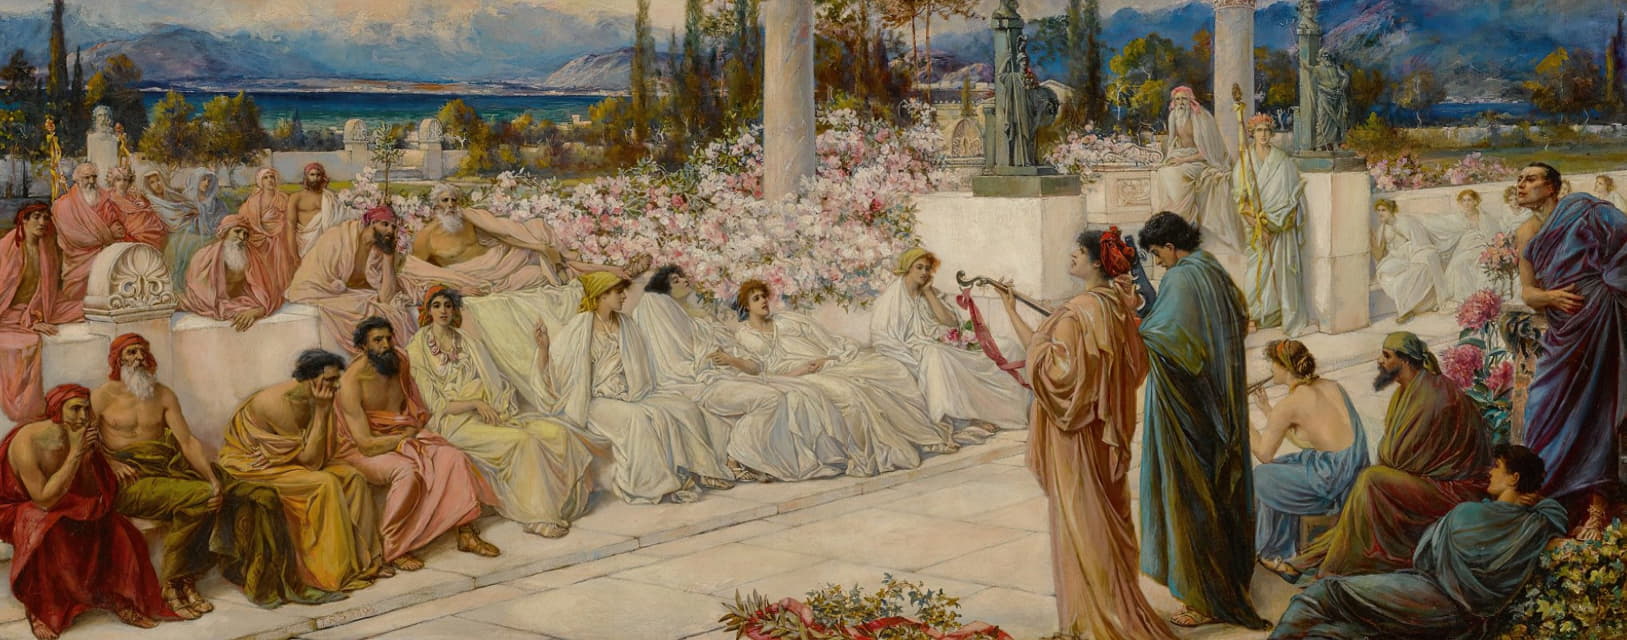 Thomas Ralph Spence - The disciples of Sappho